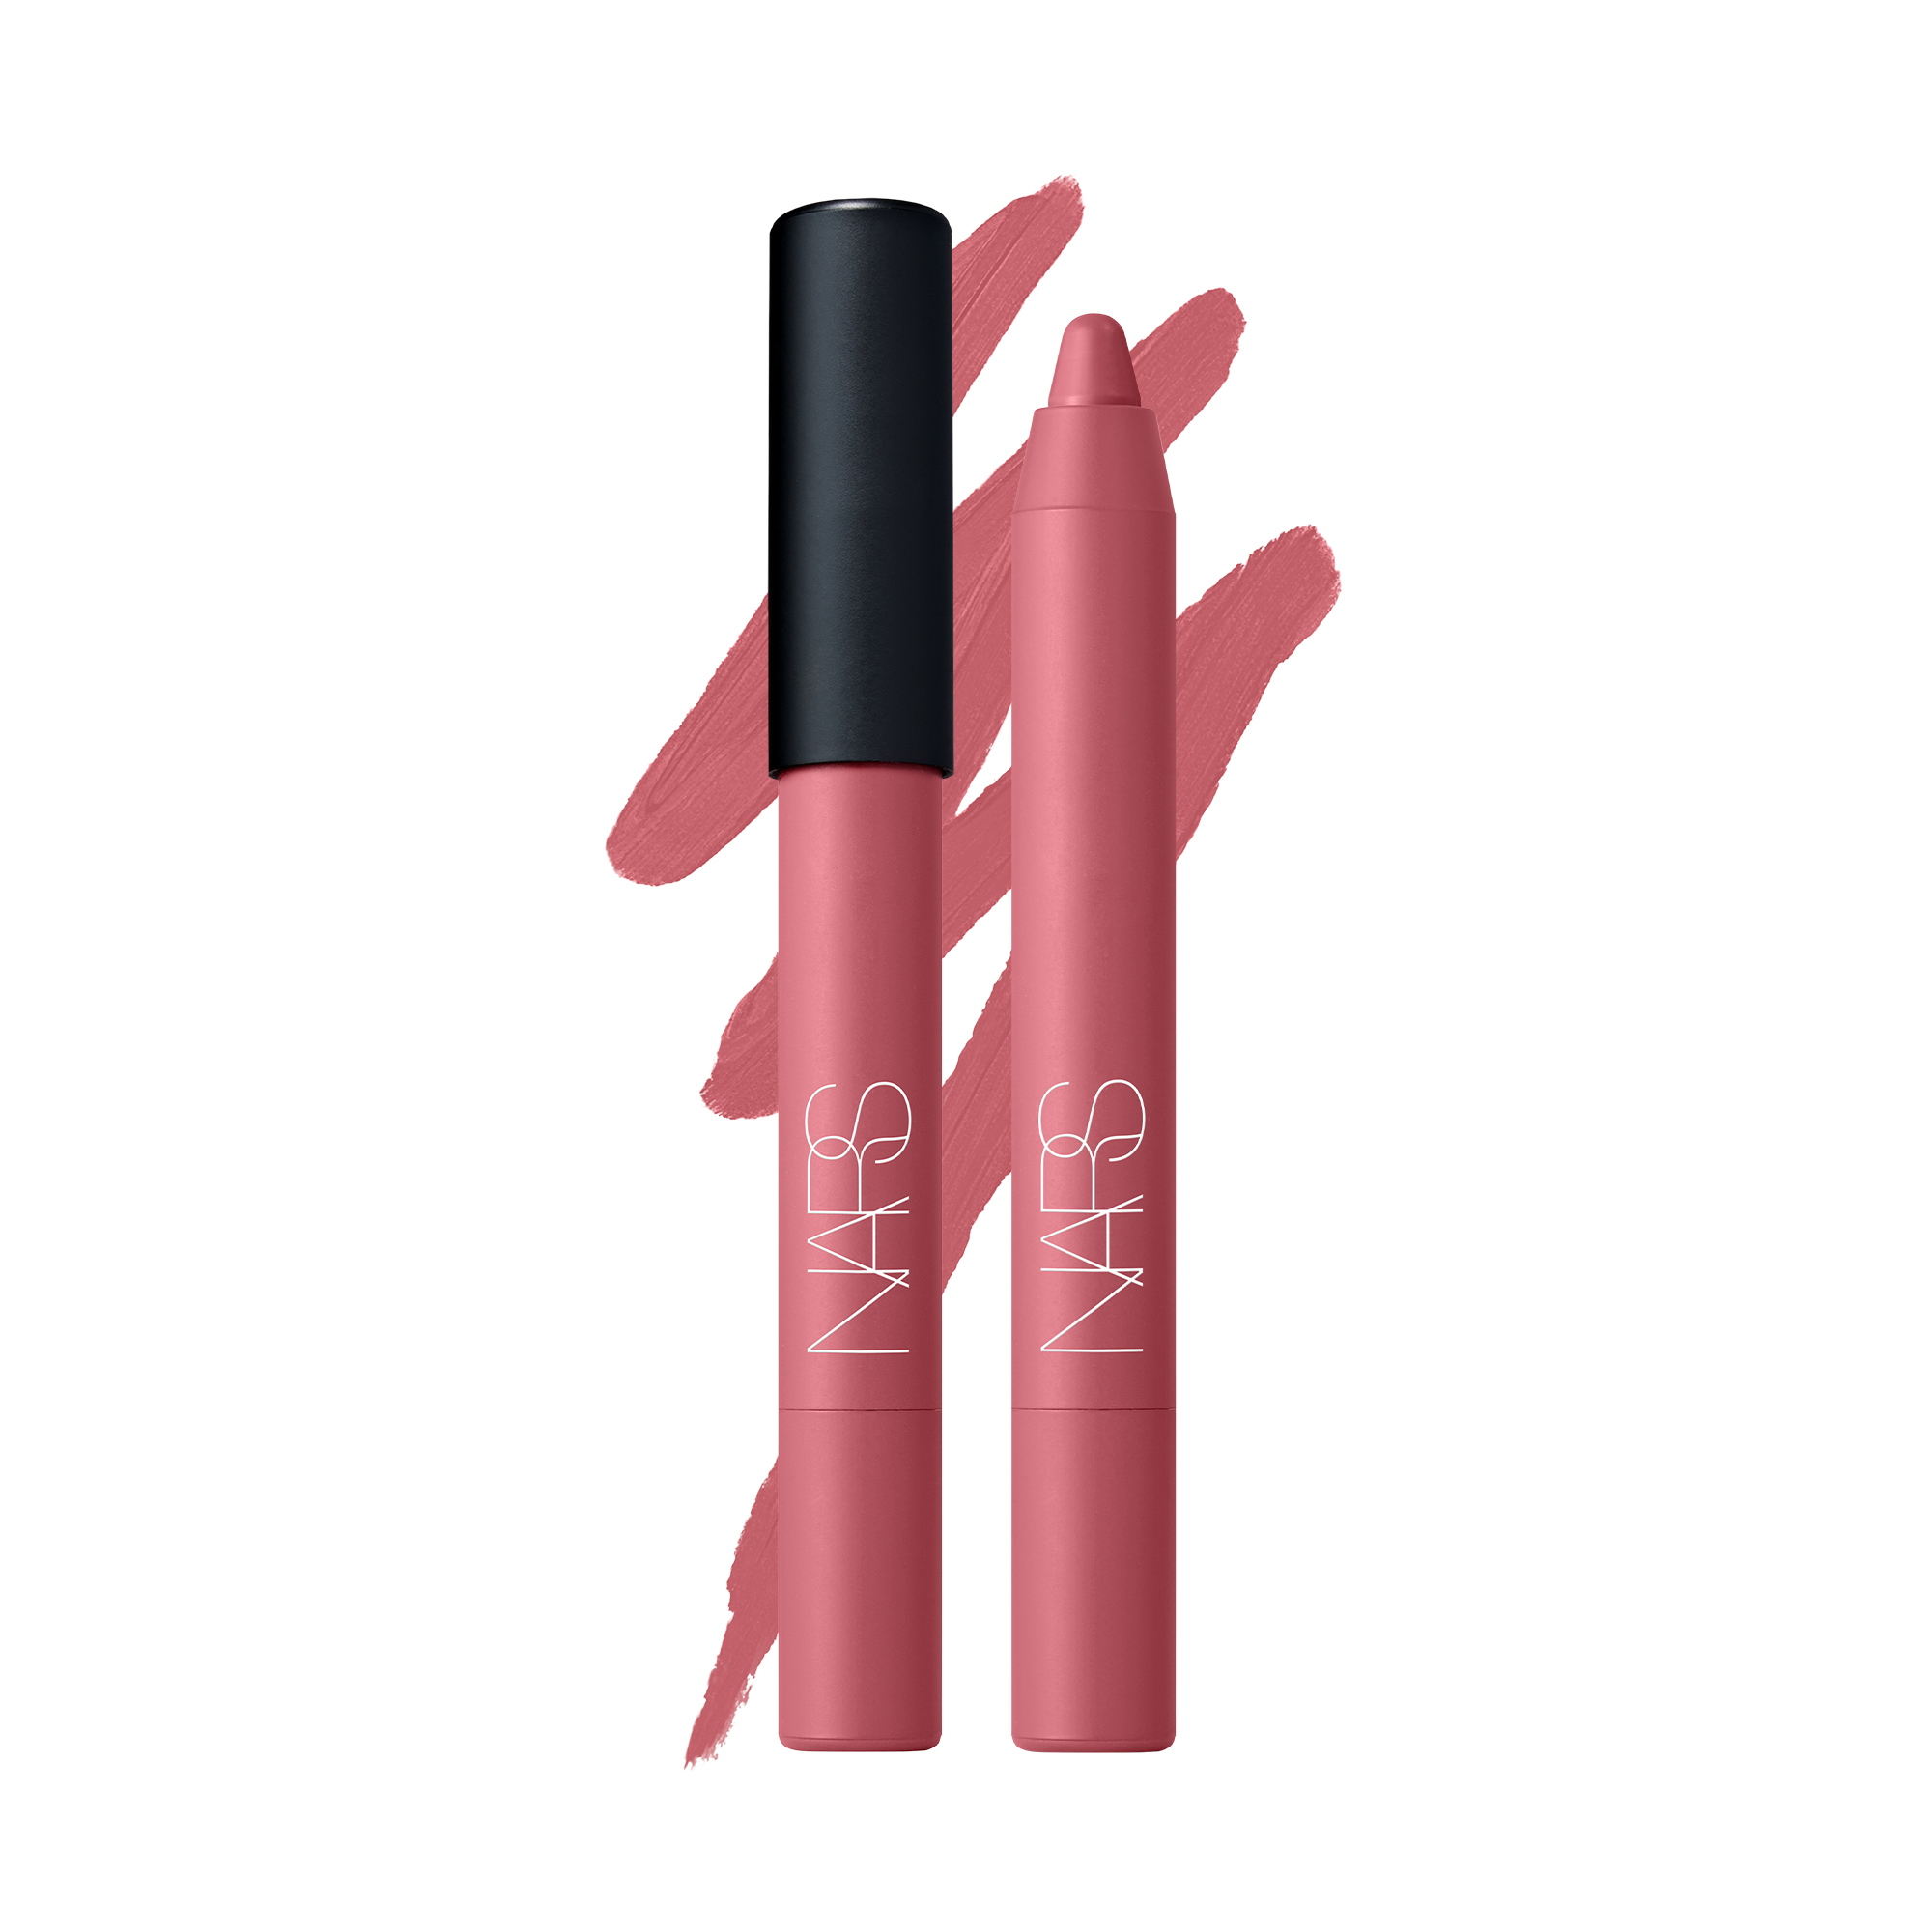 Sephora What's the Matter Soft Matte and Easy Liquid Lipstick